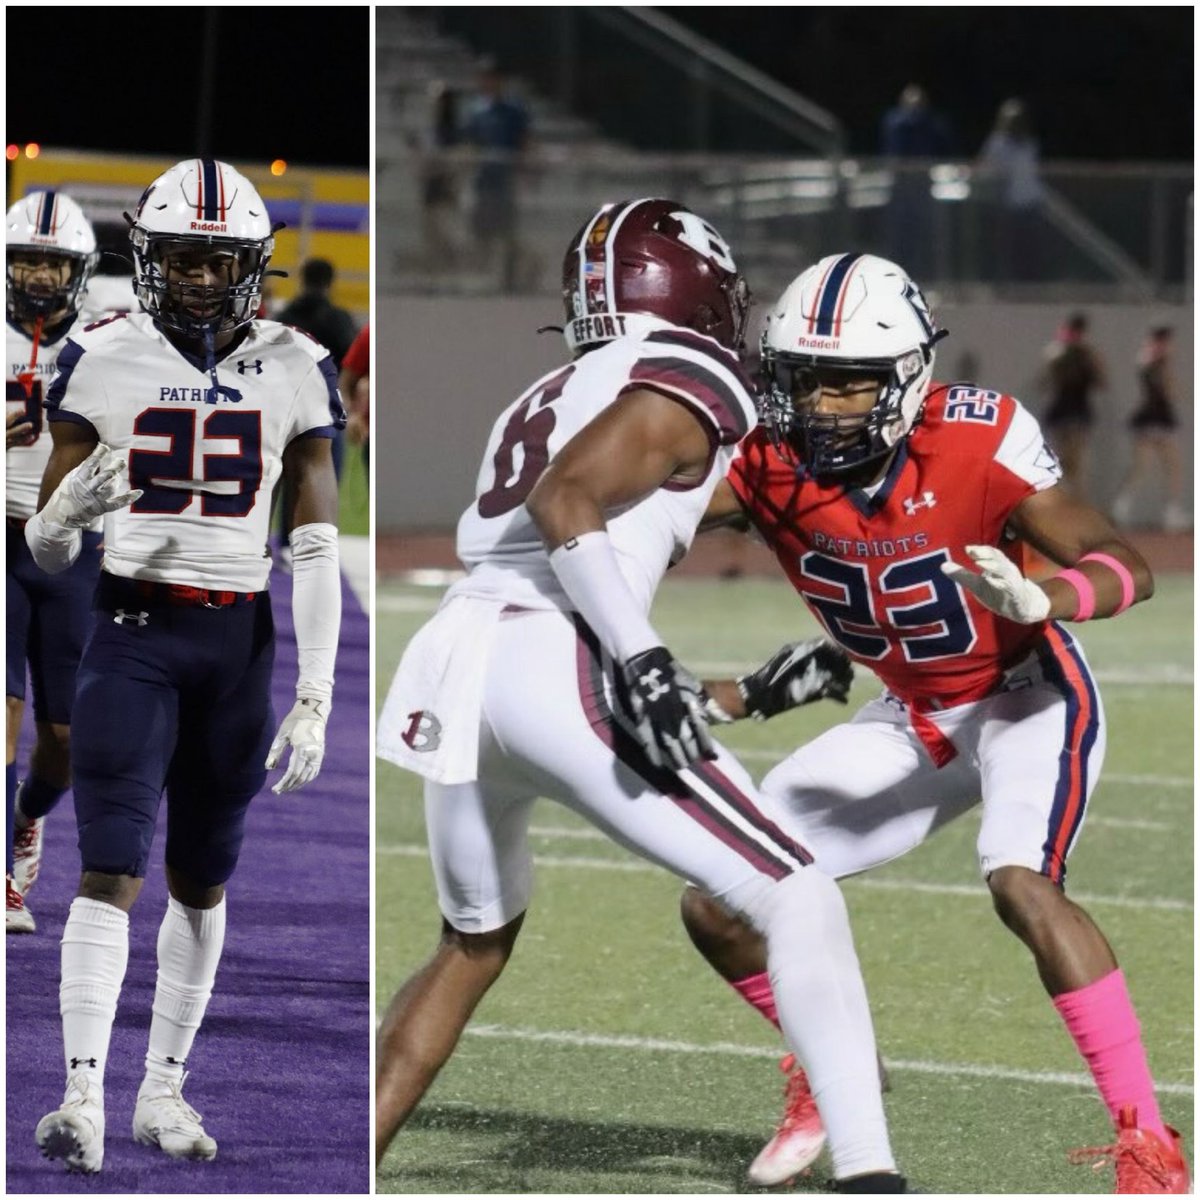 For three years @HWATZXON has proven he is of the best All-around CB's in his class. He is also one of the least targeted, so it doesn't show up on the stat sheet. #ClassOf2023 #ShutDownCorner #SAAllStar
hudl.com/v/2J8m5f